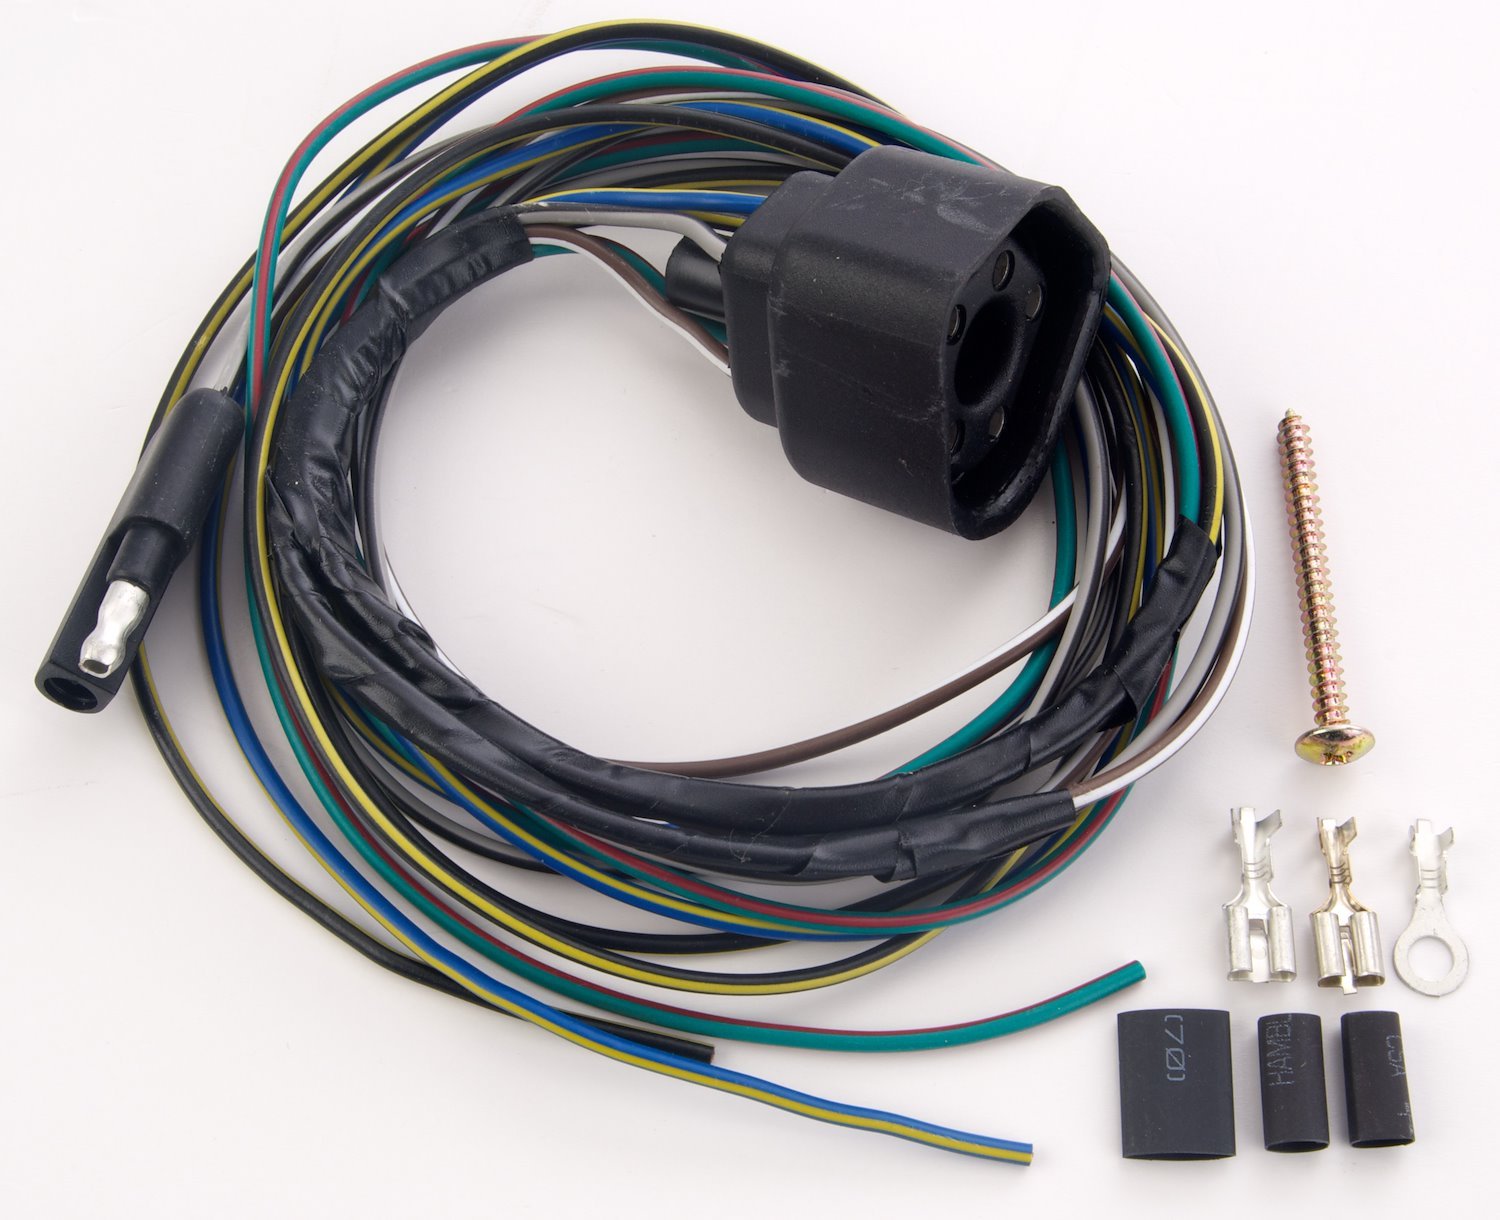 Wiring Harness Kit for Mopar Ignition Box